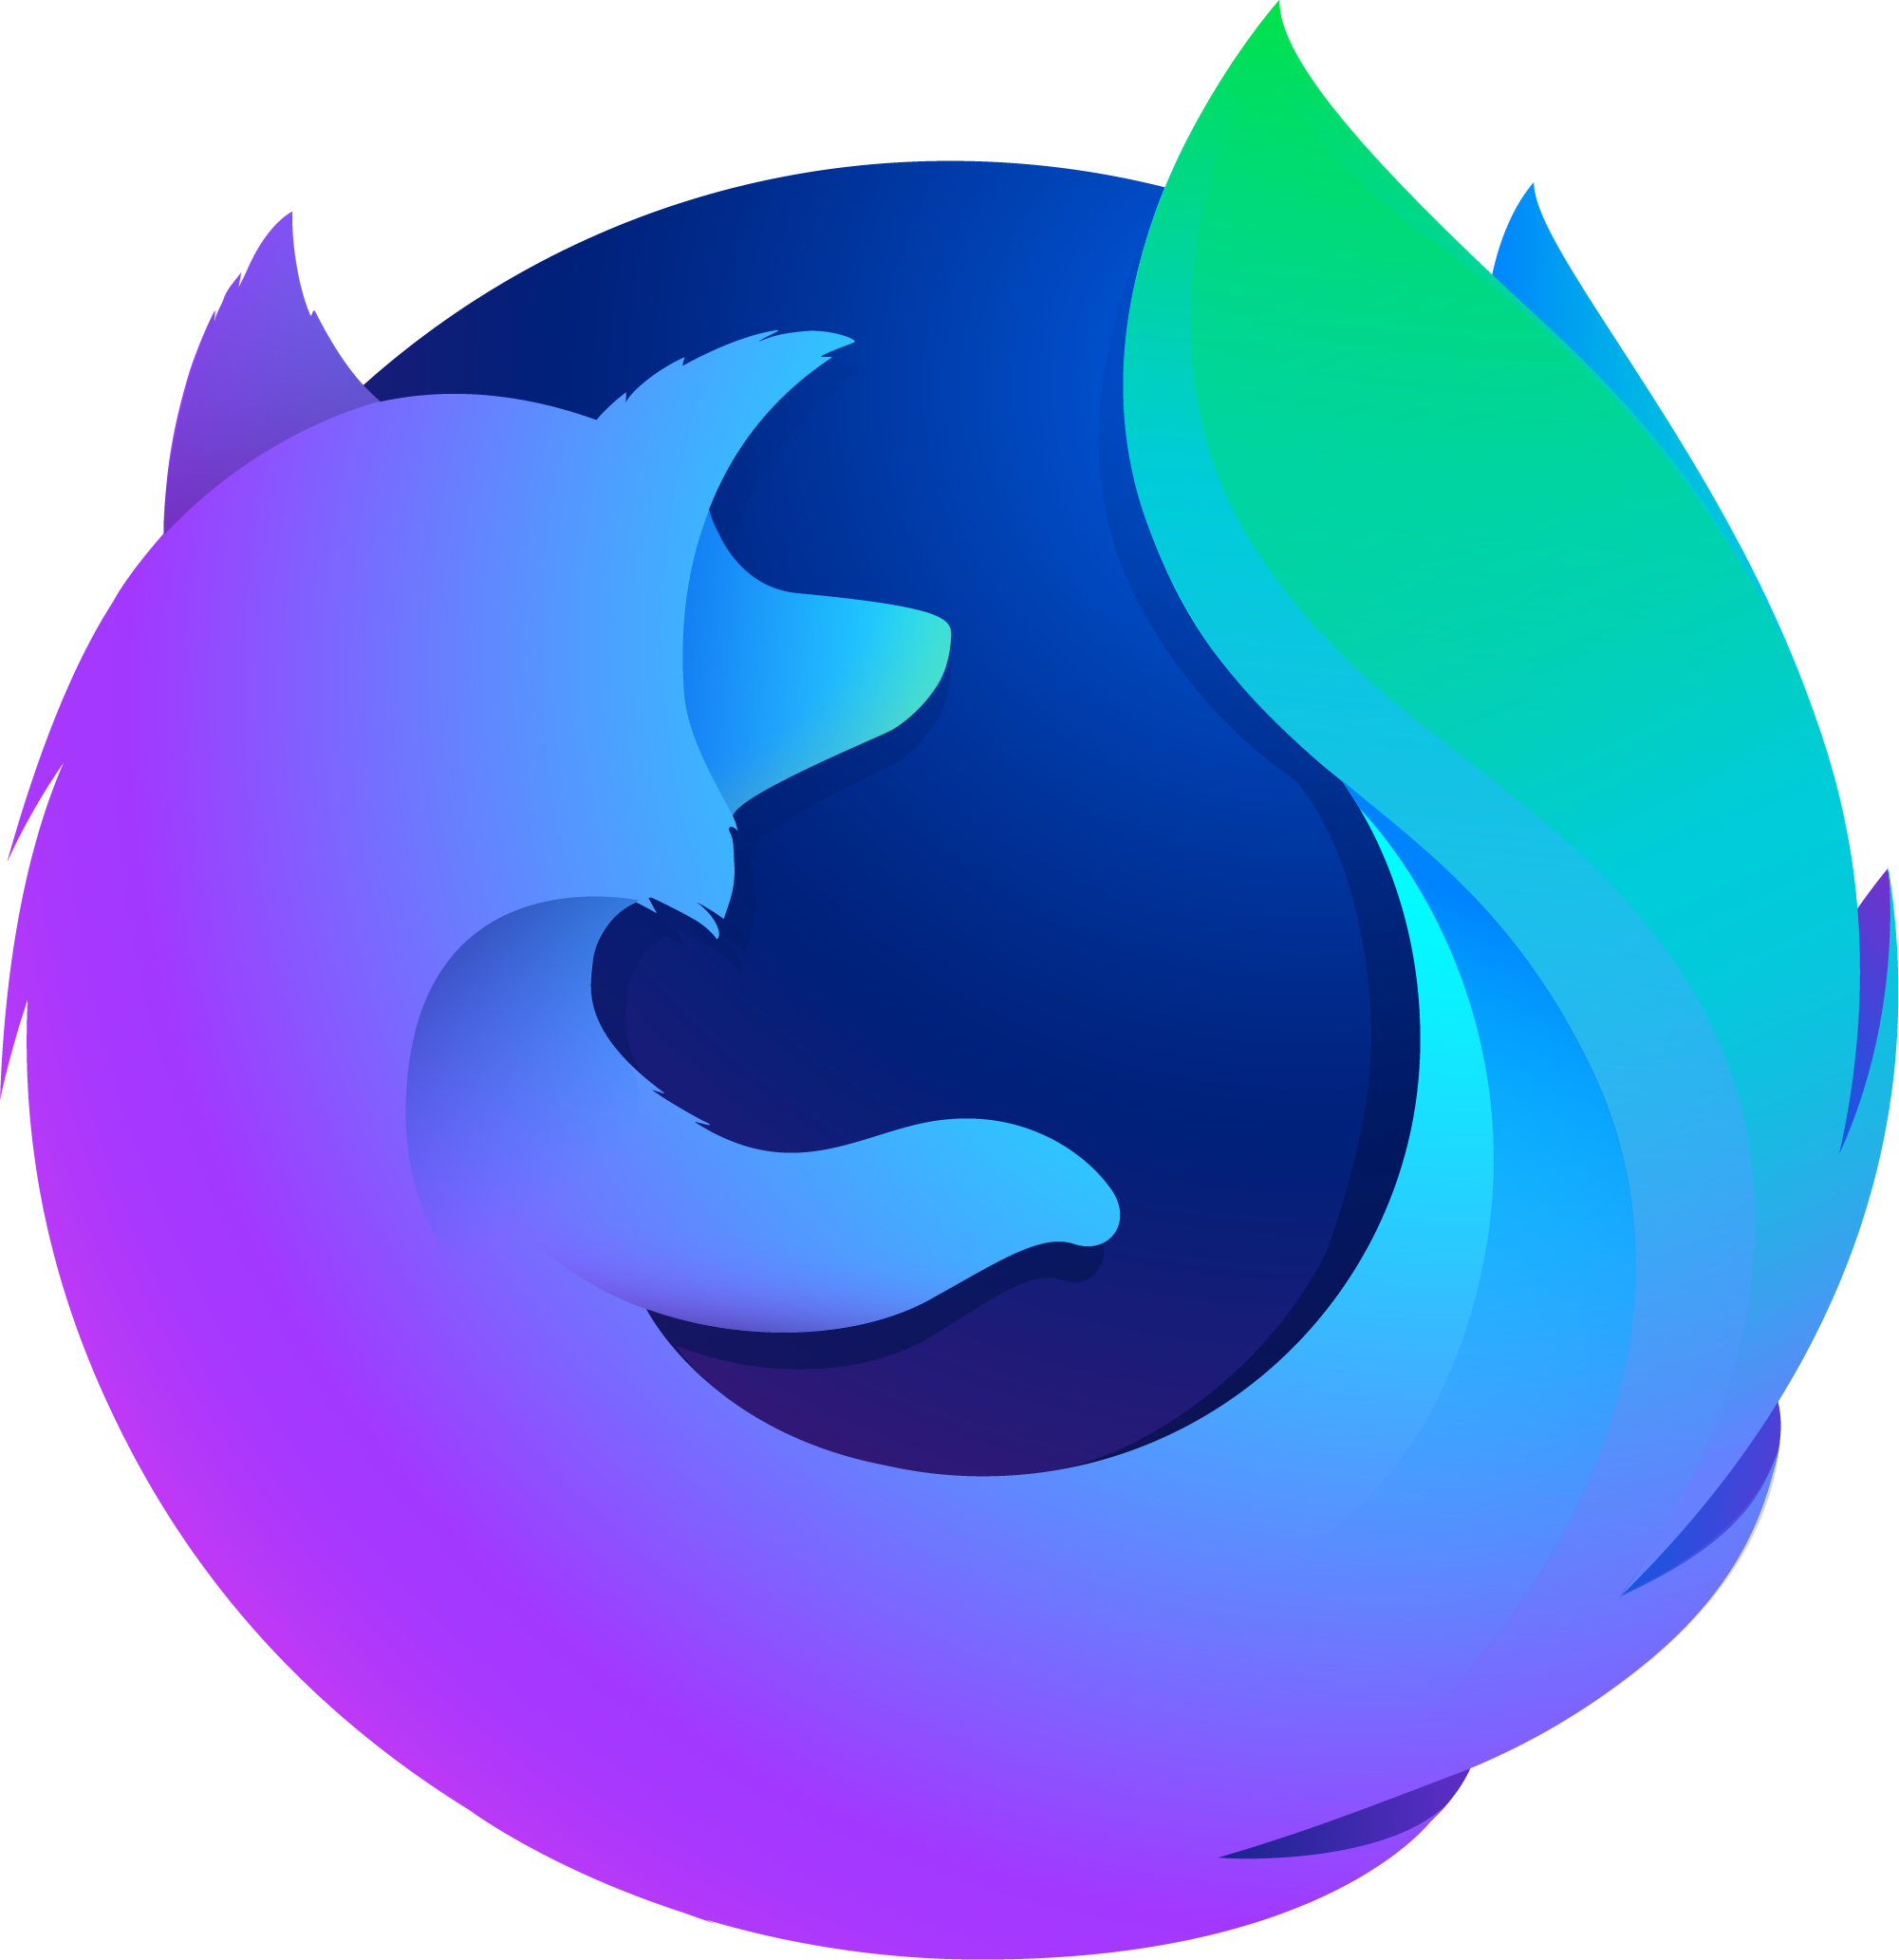 Mozilla Releases Firefox 60 - Host of Security, Enterprise Upgrades